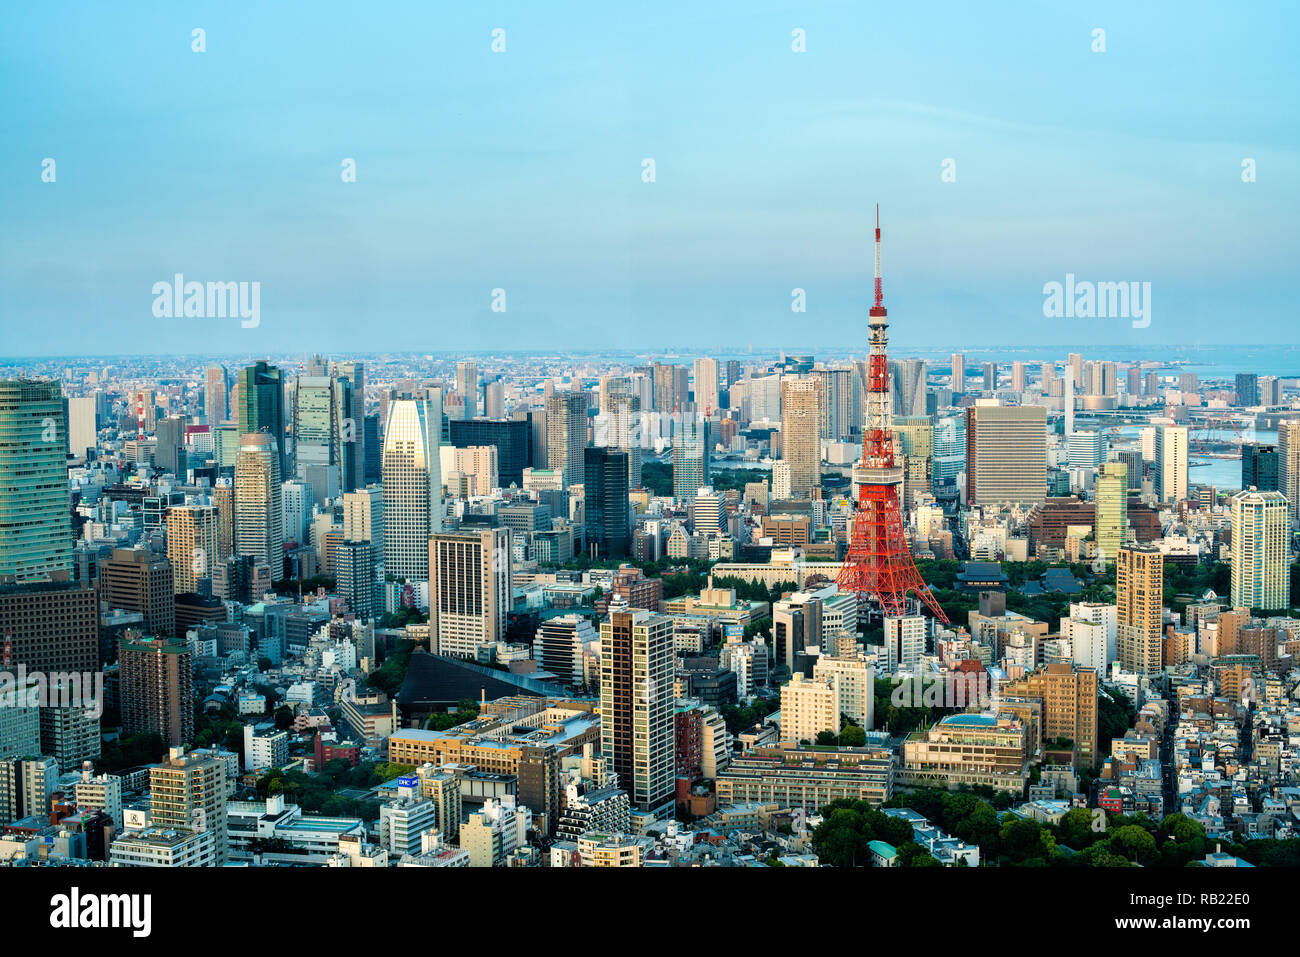 Tokyo tower wide angle view, Japan. Stock Photo